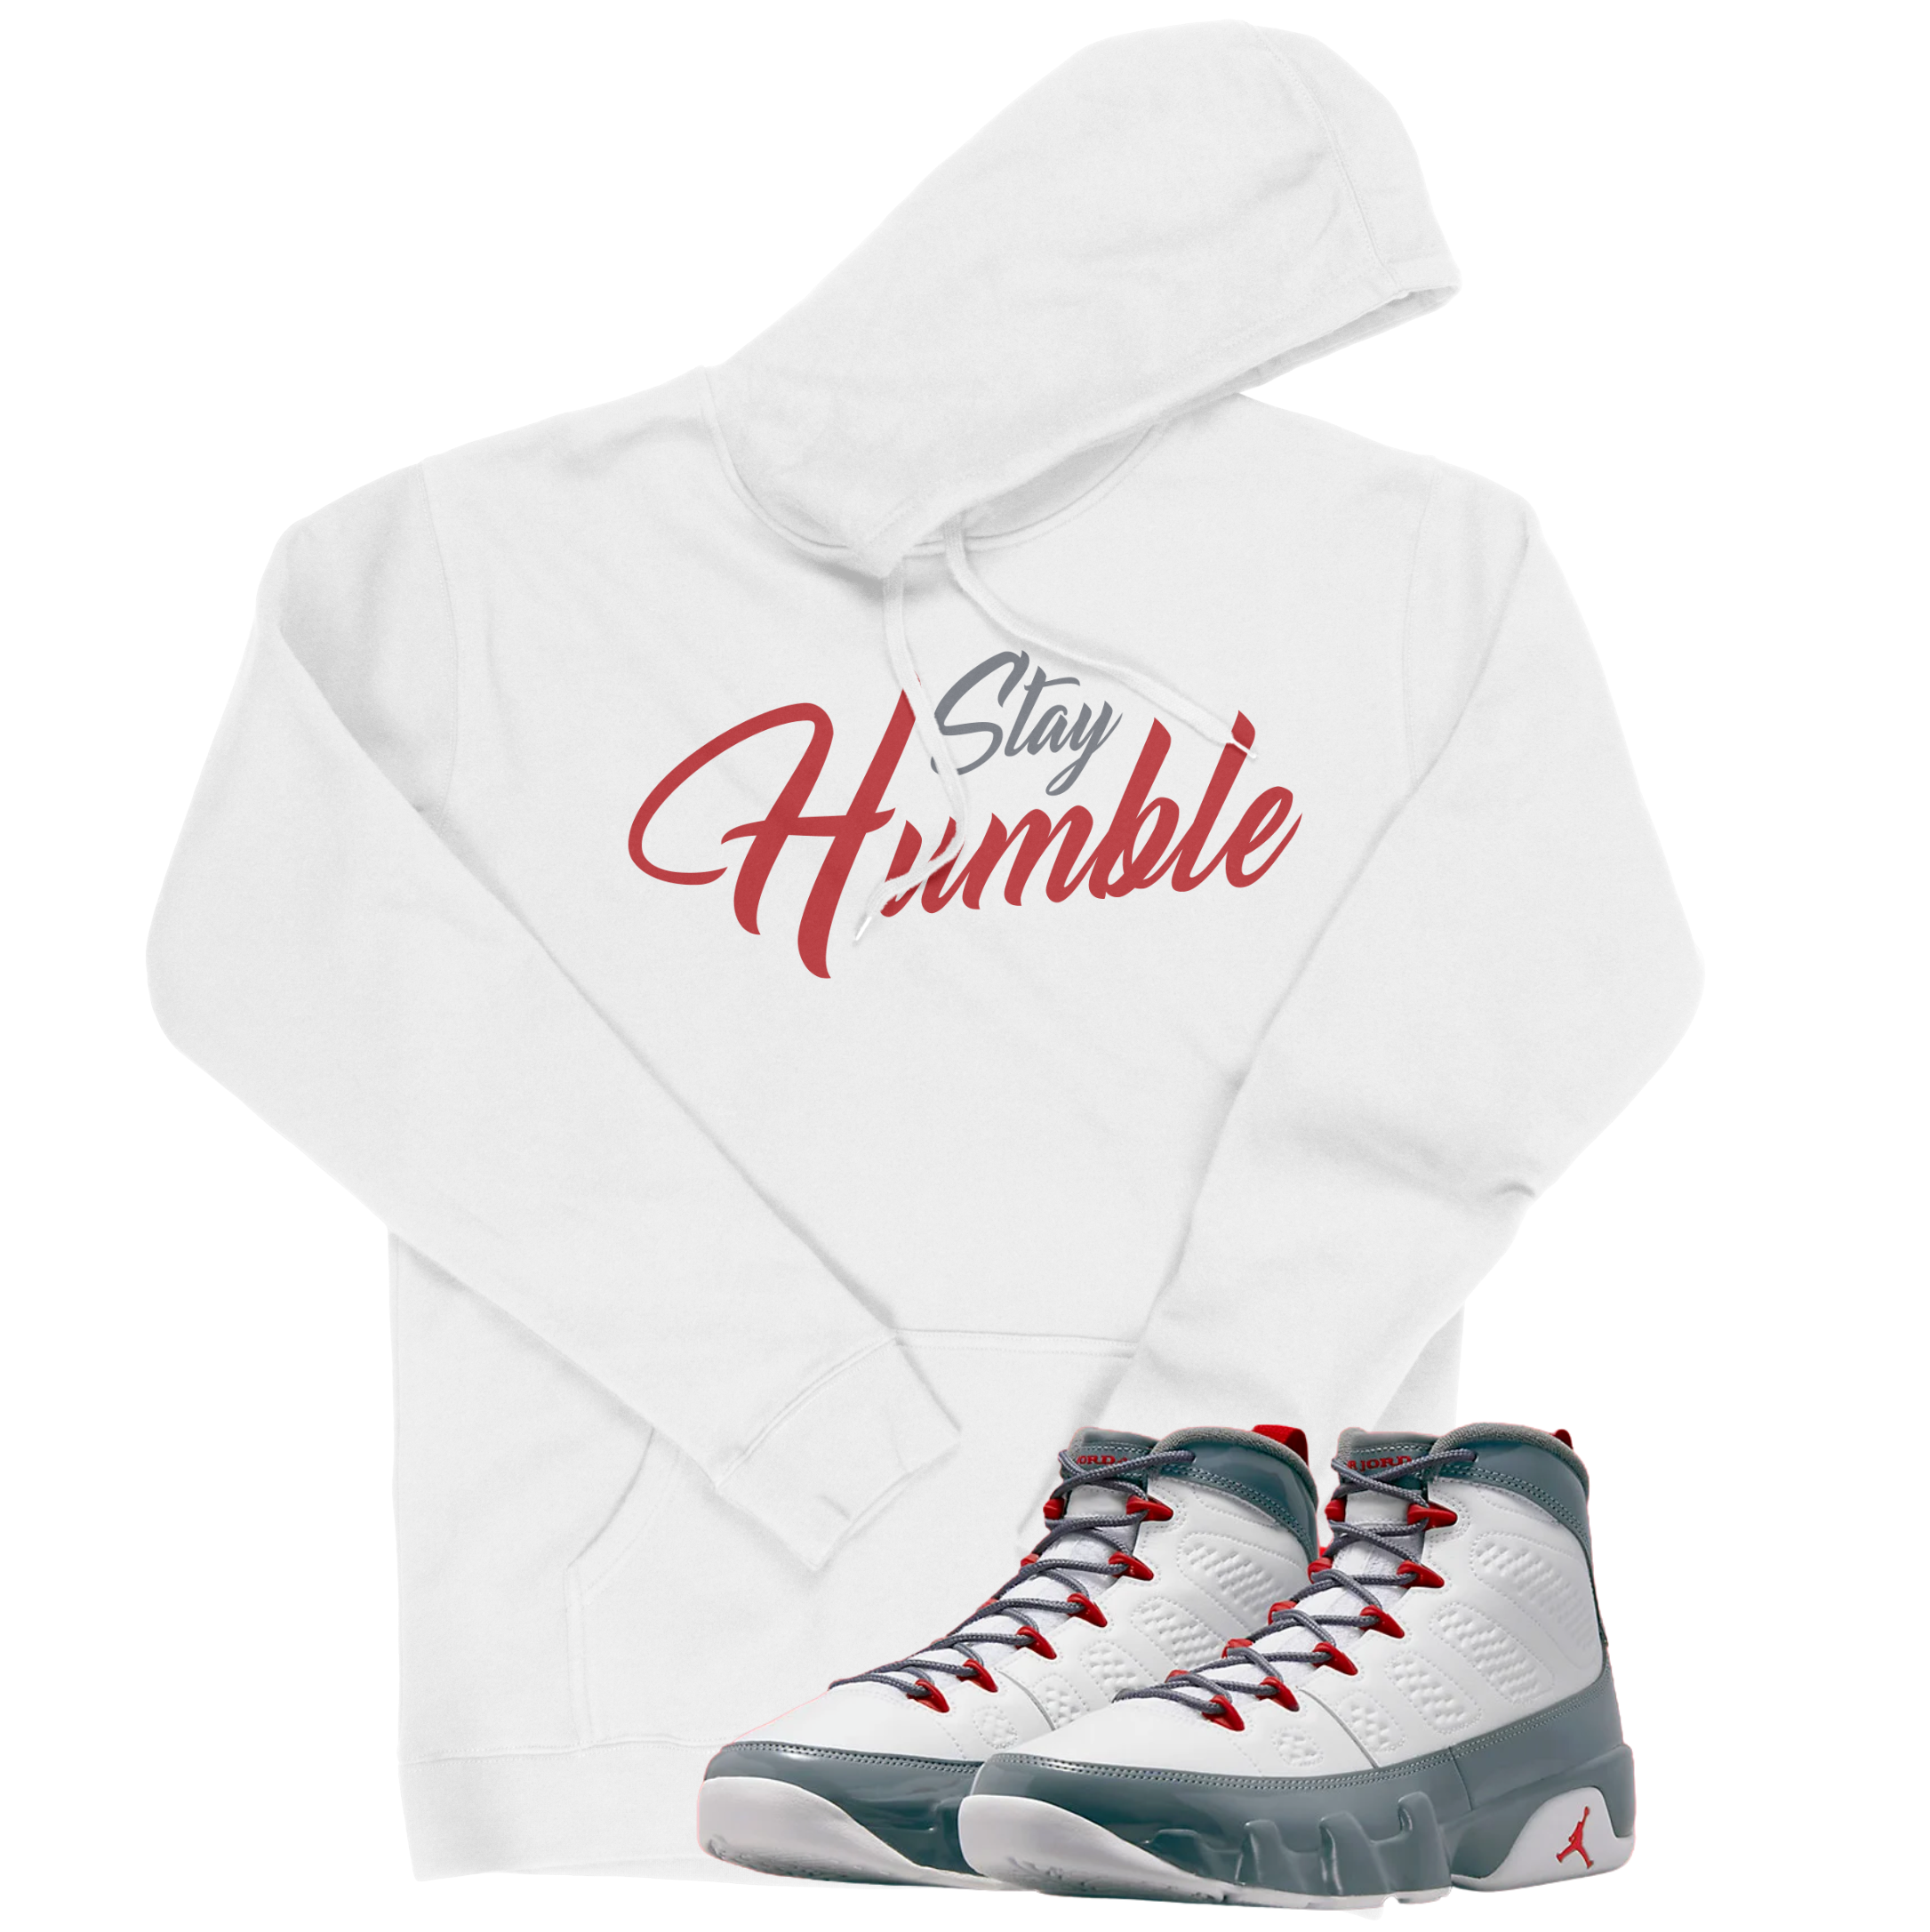 Air Jordan 9 Fire Red I Stay Humble Script Hoodie | Air Jordan 9 Fire Red | Sneaker Match | Jordan Matching Outfits